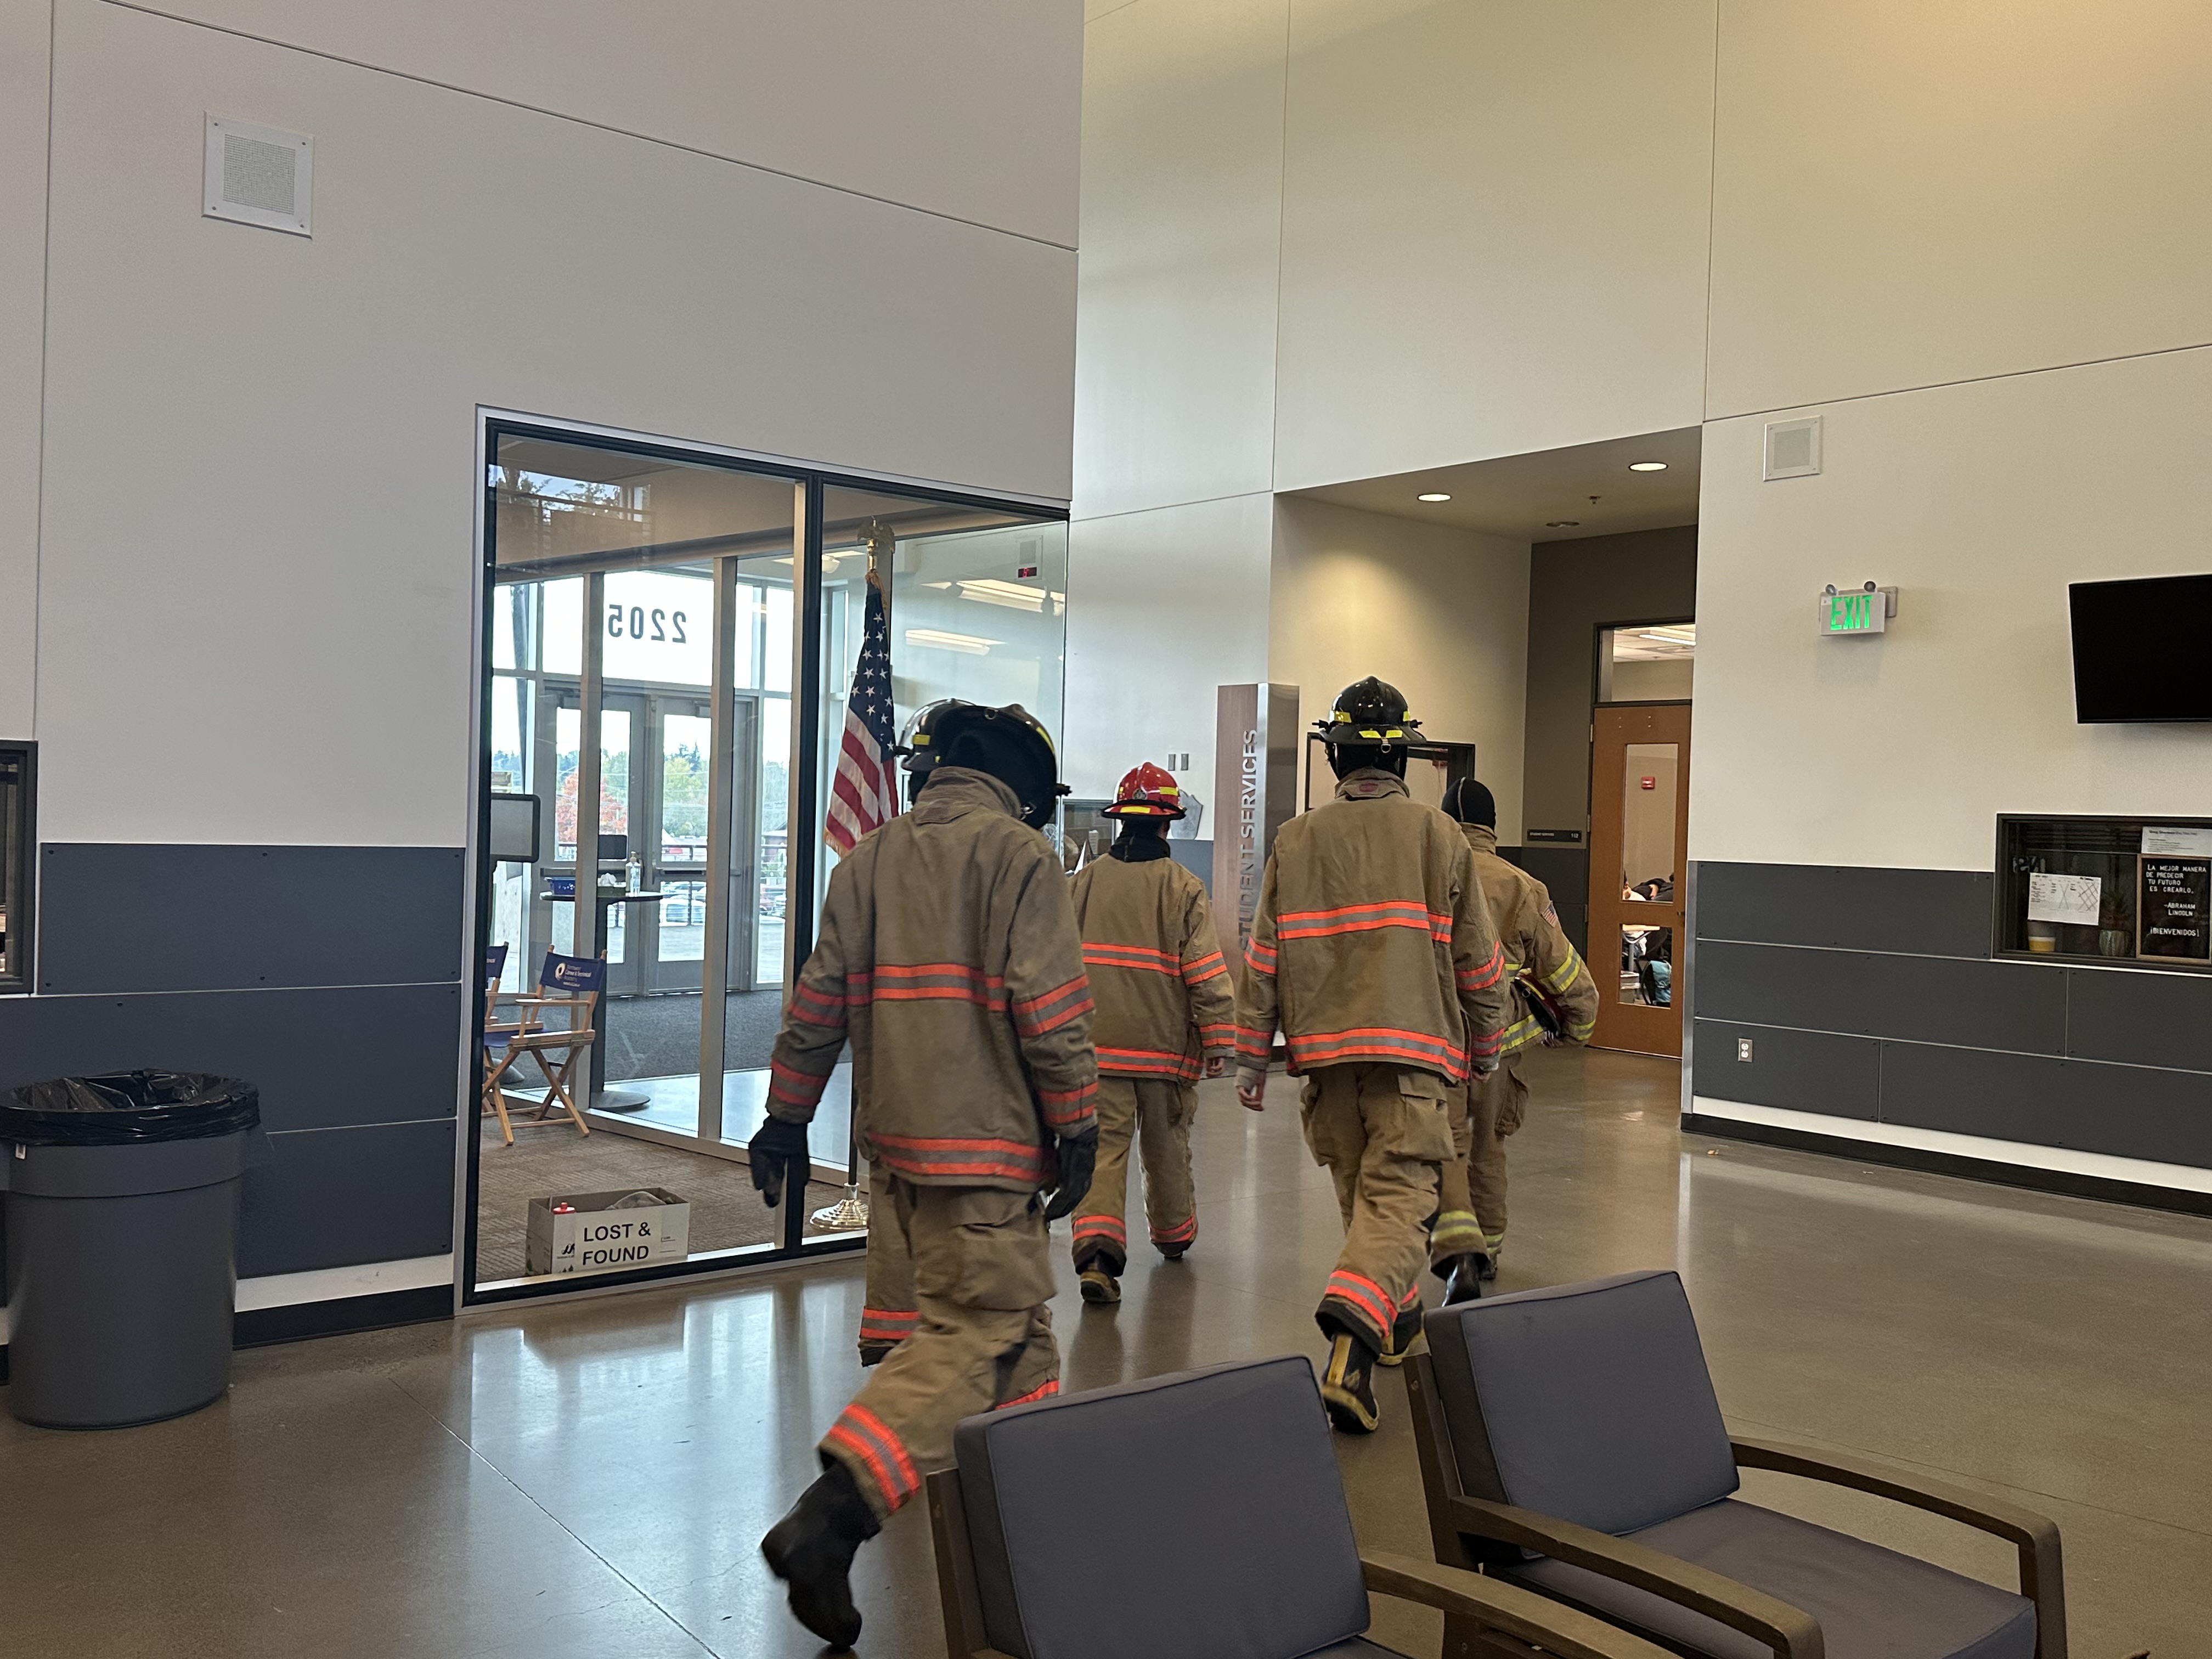 NCTA firefighter students